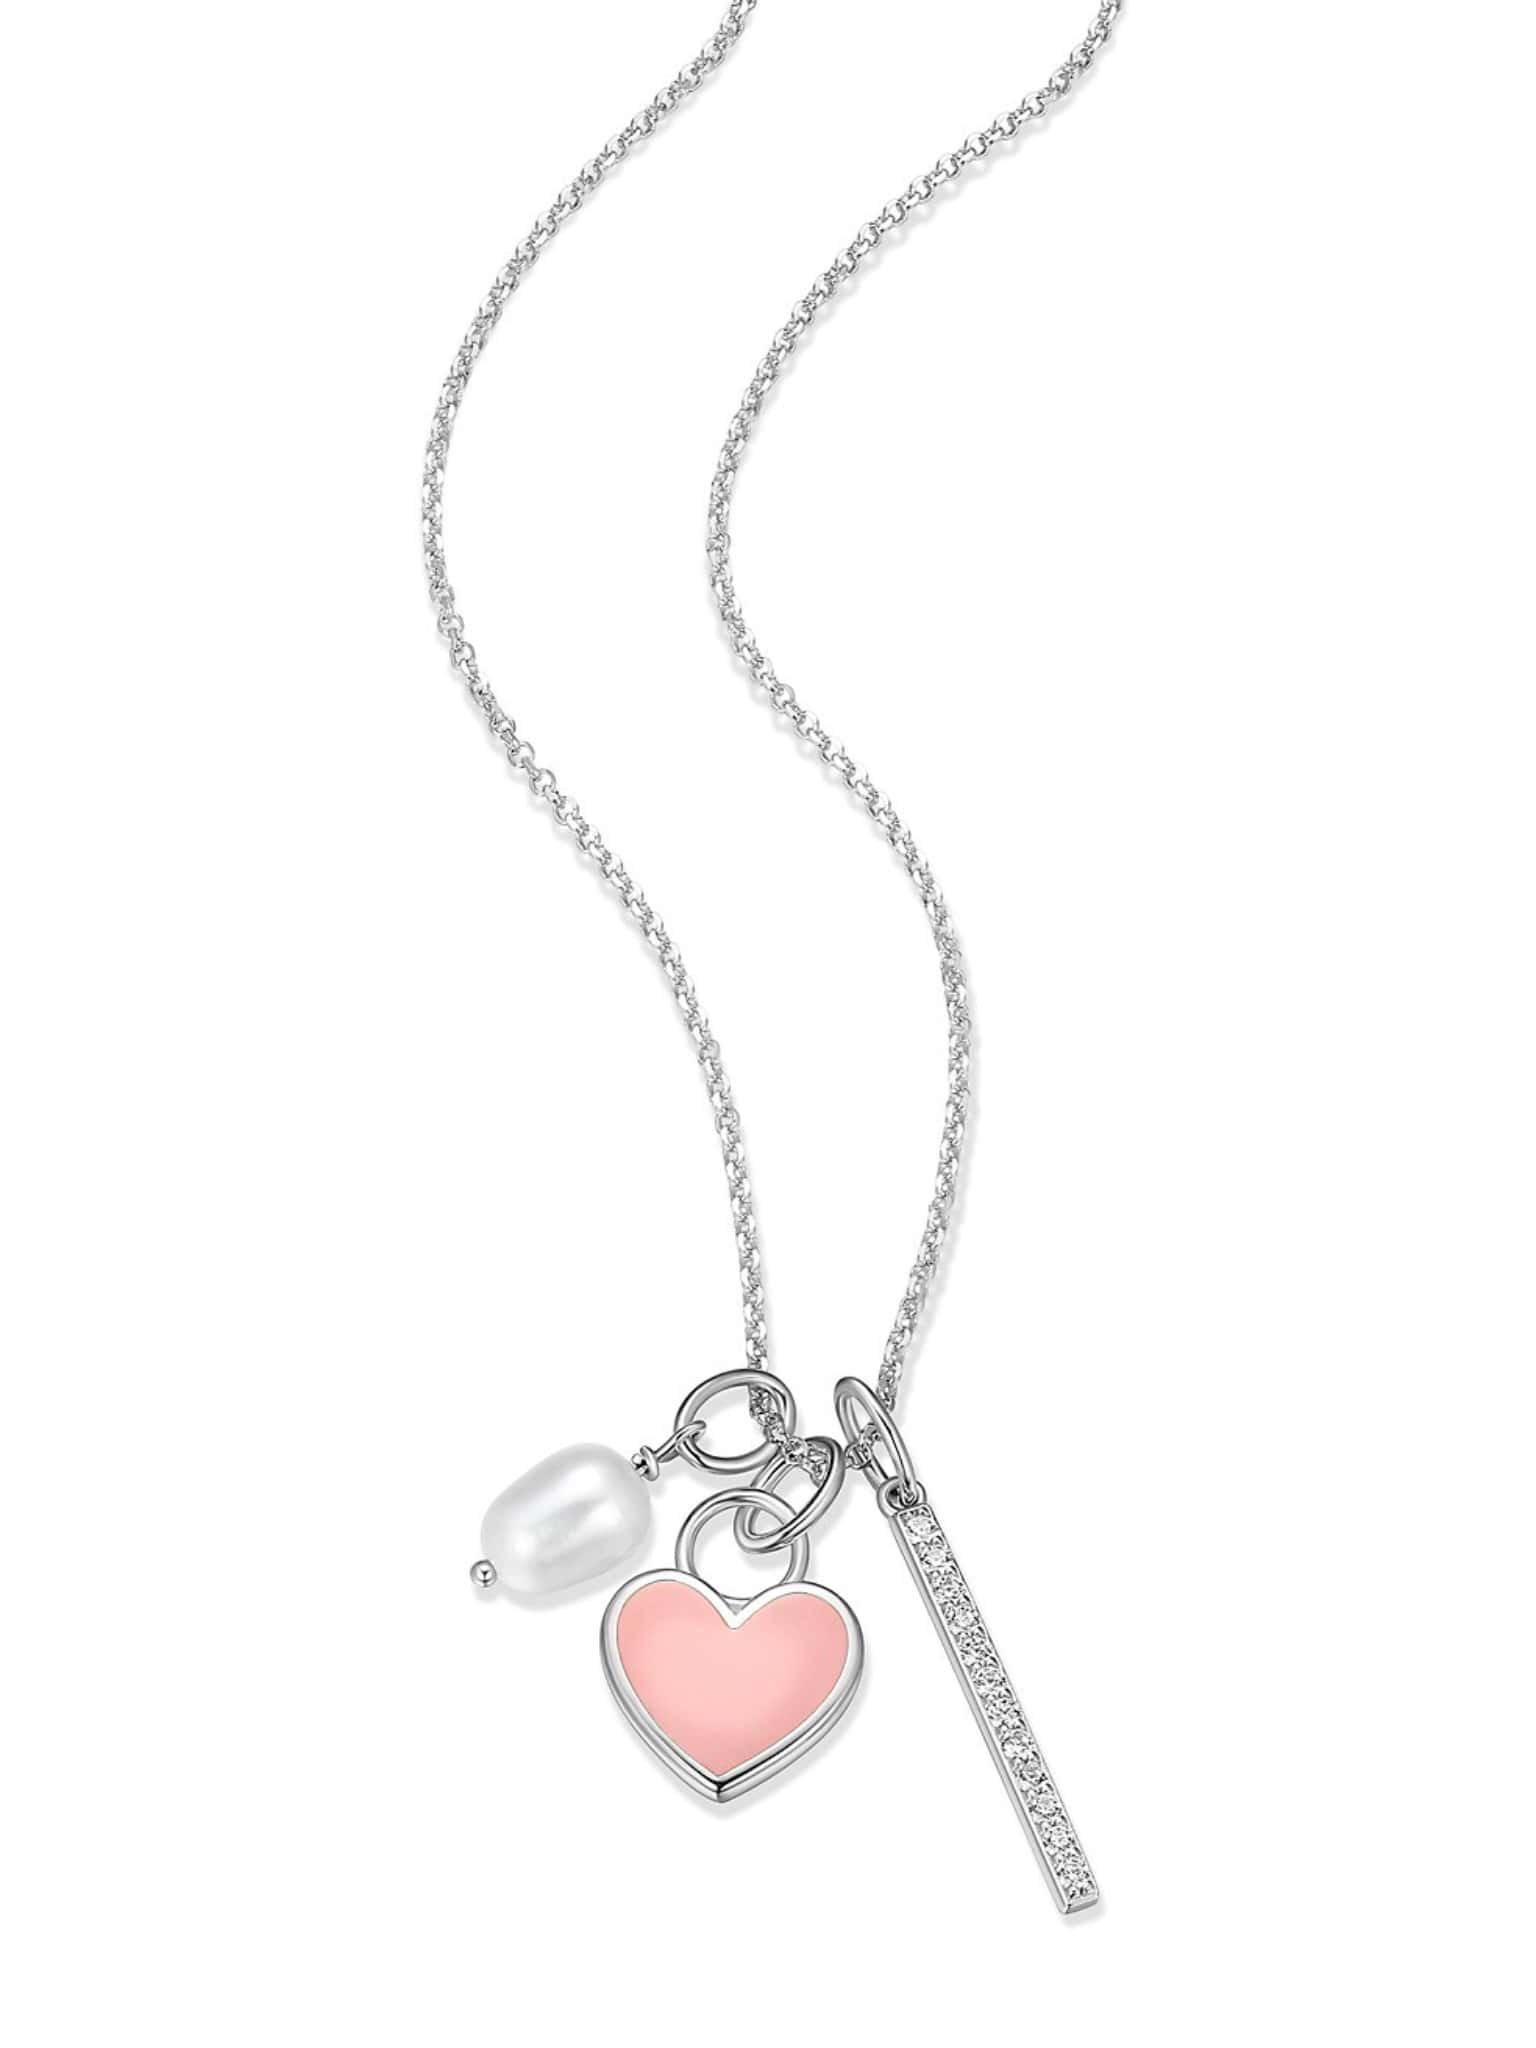 Multi Charm Silver Necklace at Arman's Jewellers Kitchener